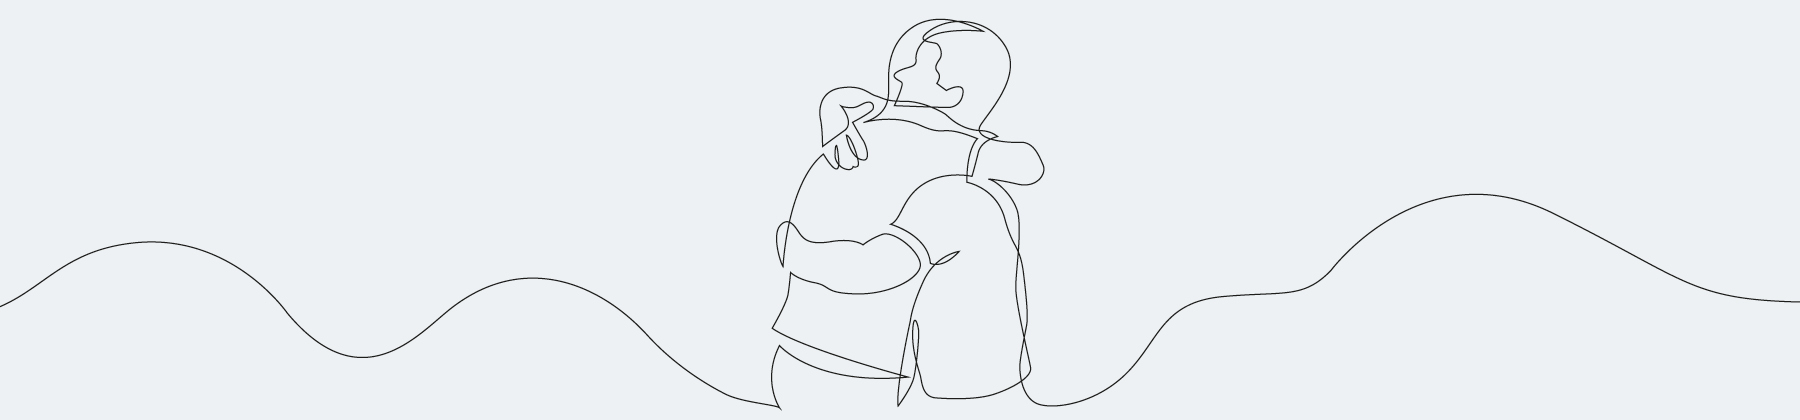 line drawing of two individuals embracing one another 